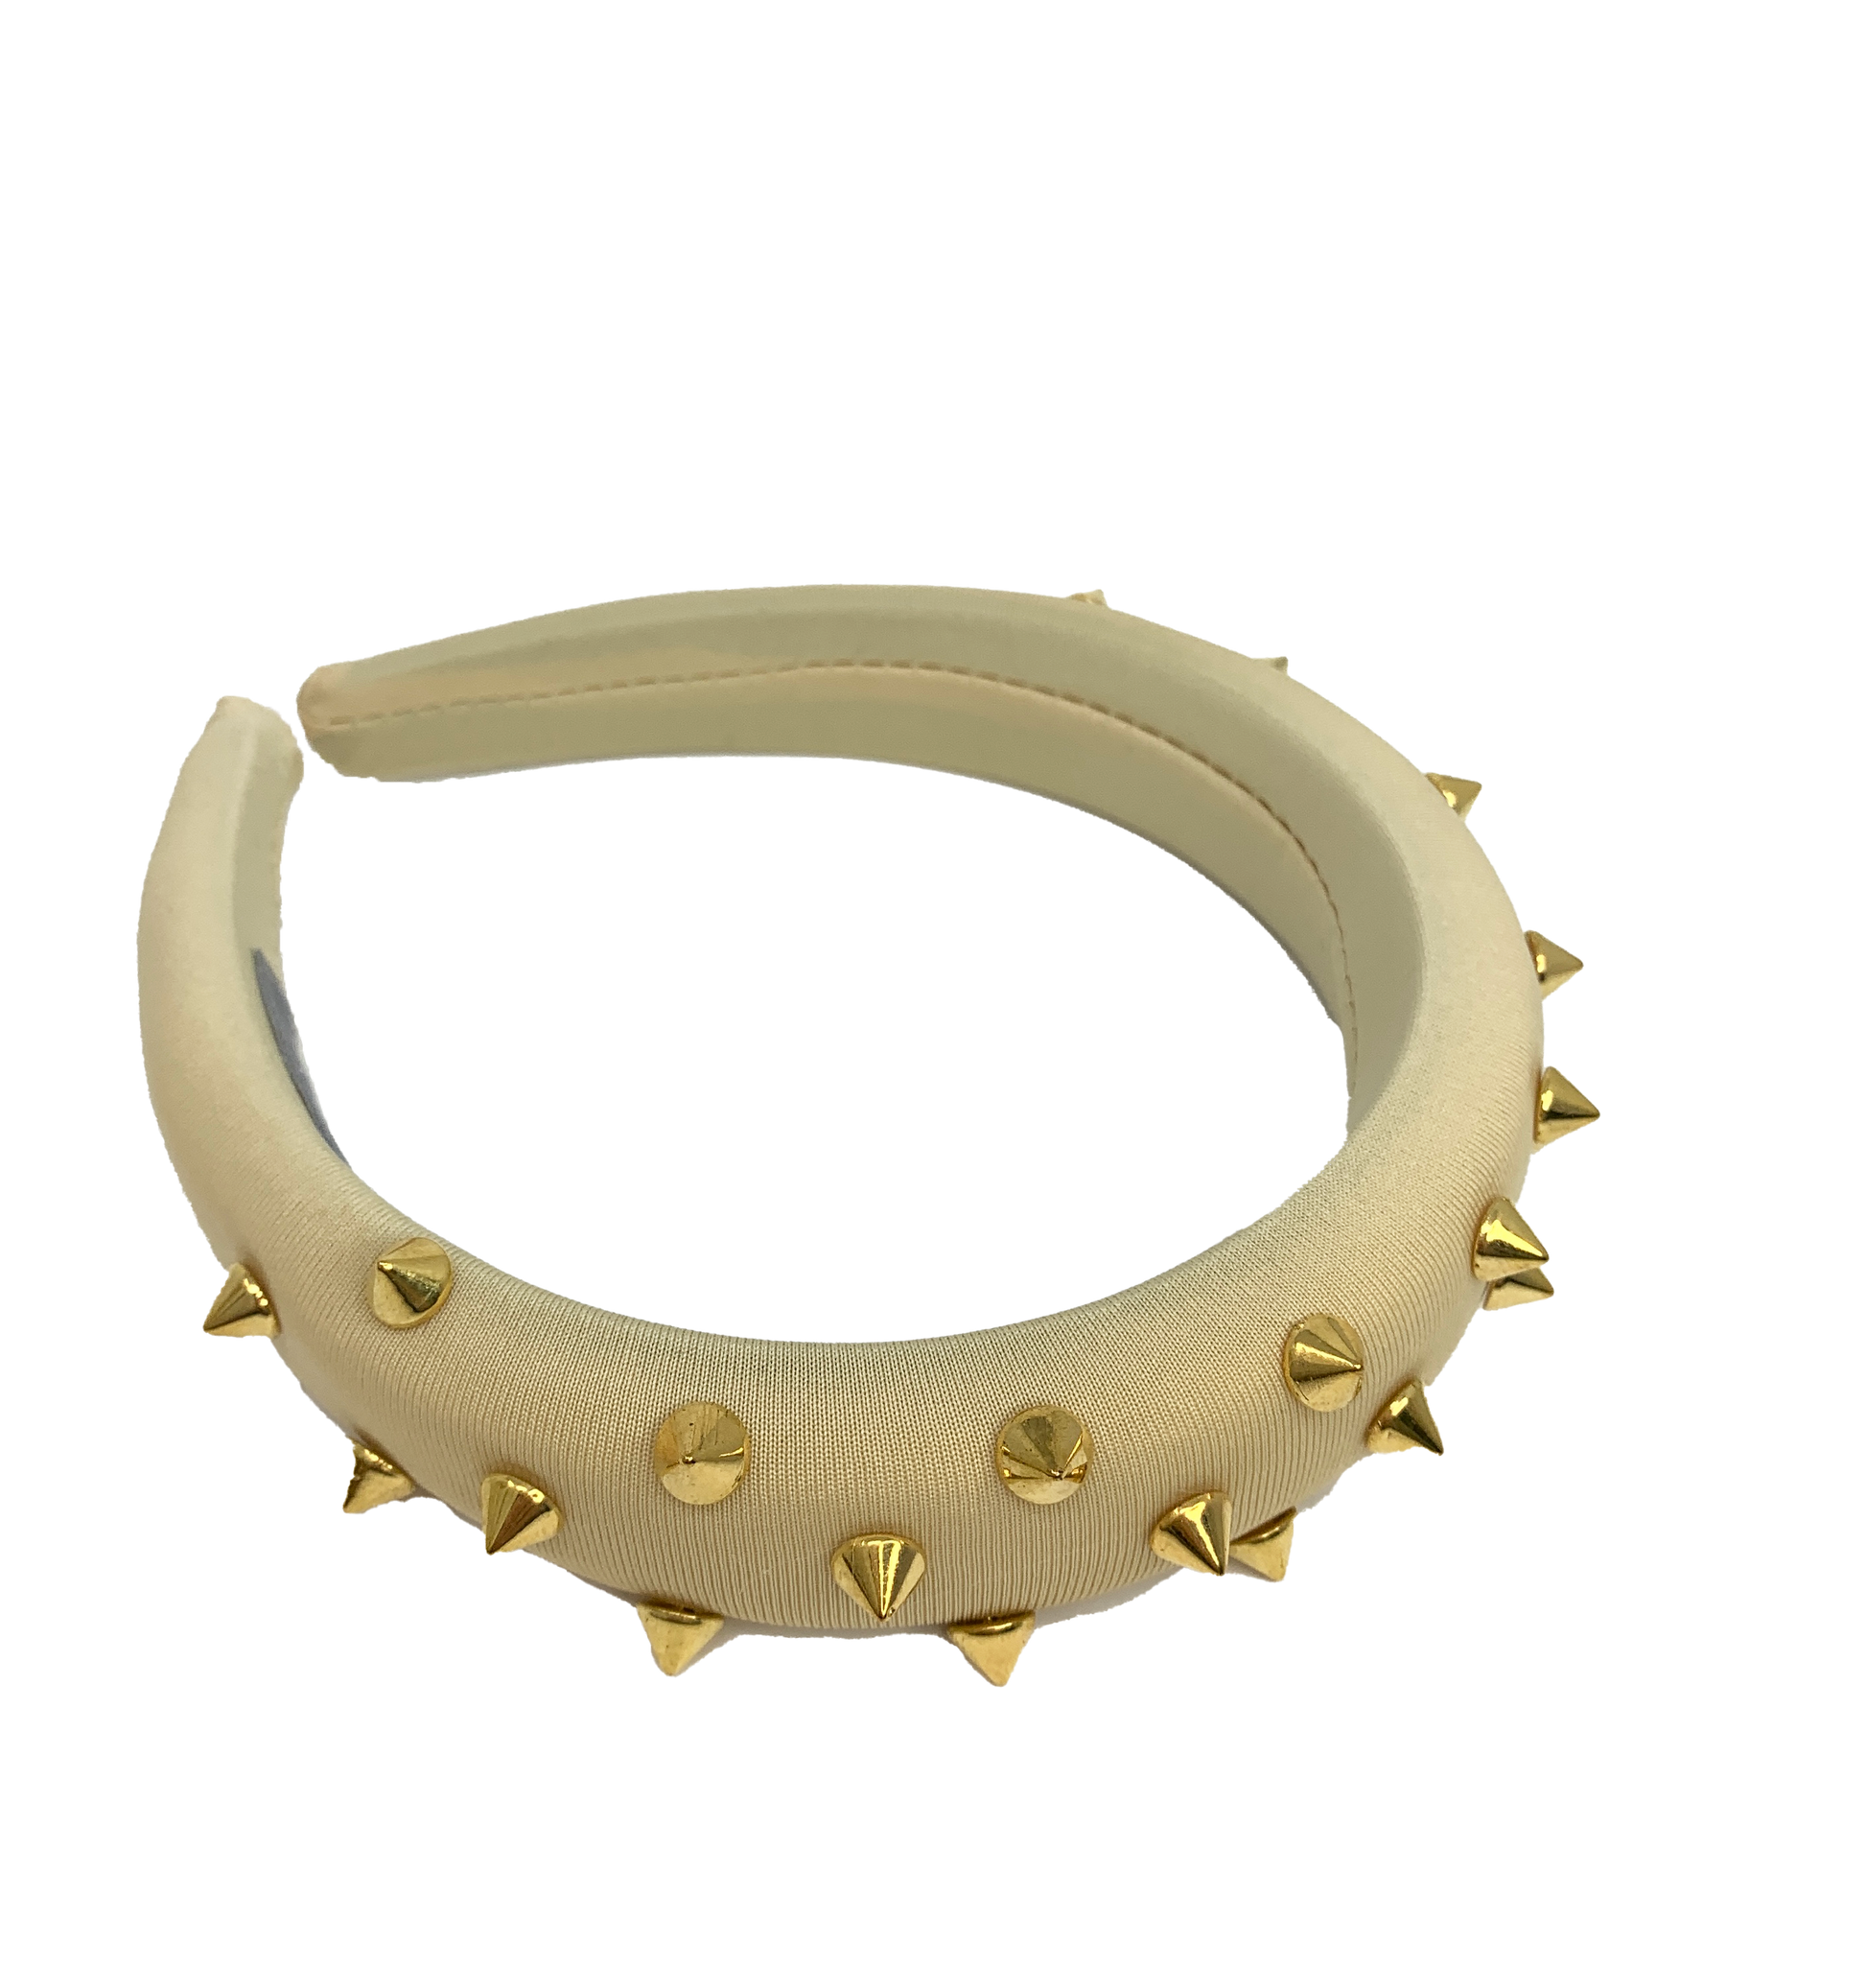 Beige padded headband with gold spikes